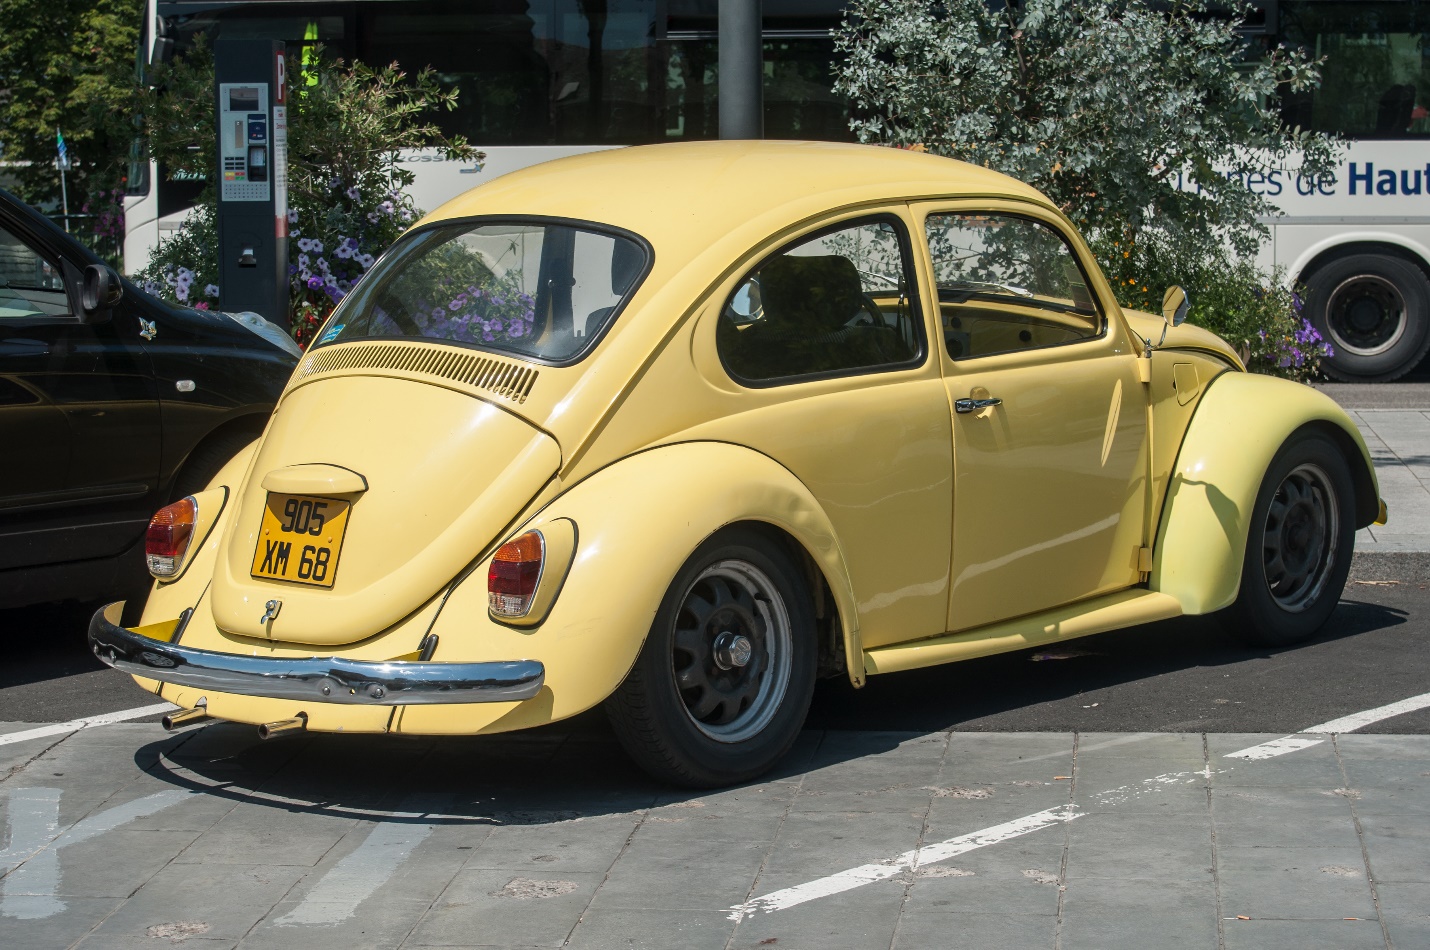 old Volkswagen yellow beetle parked in the street